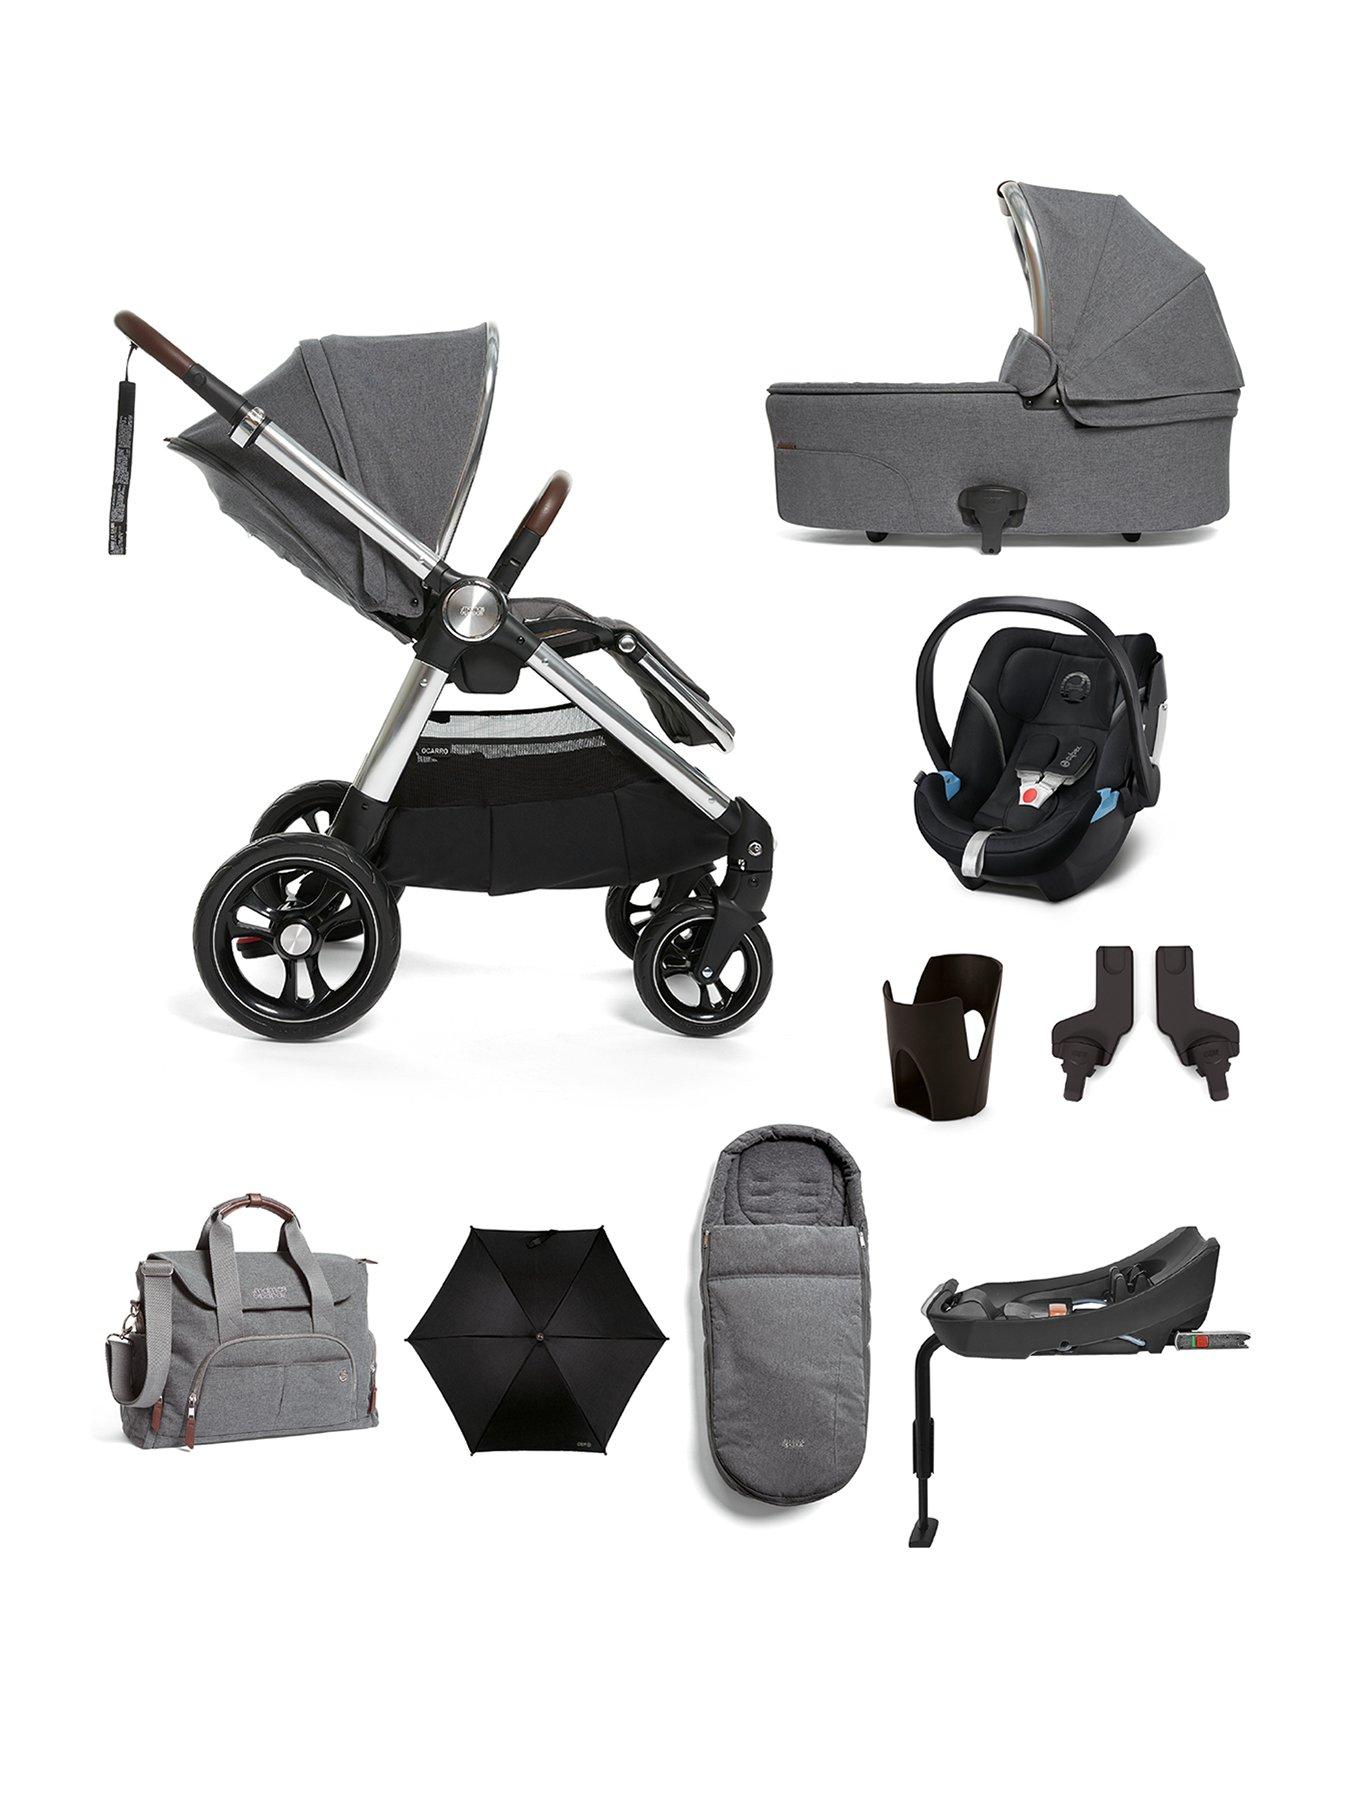 black travel systems for babies